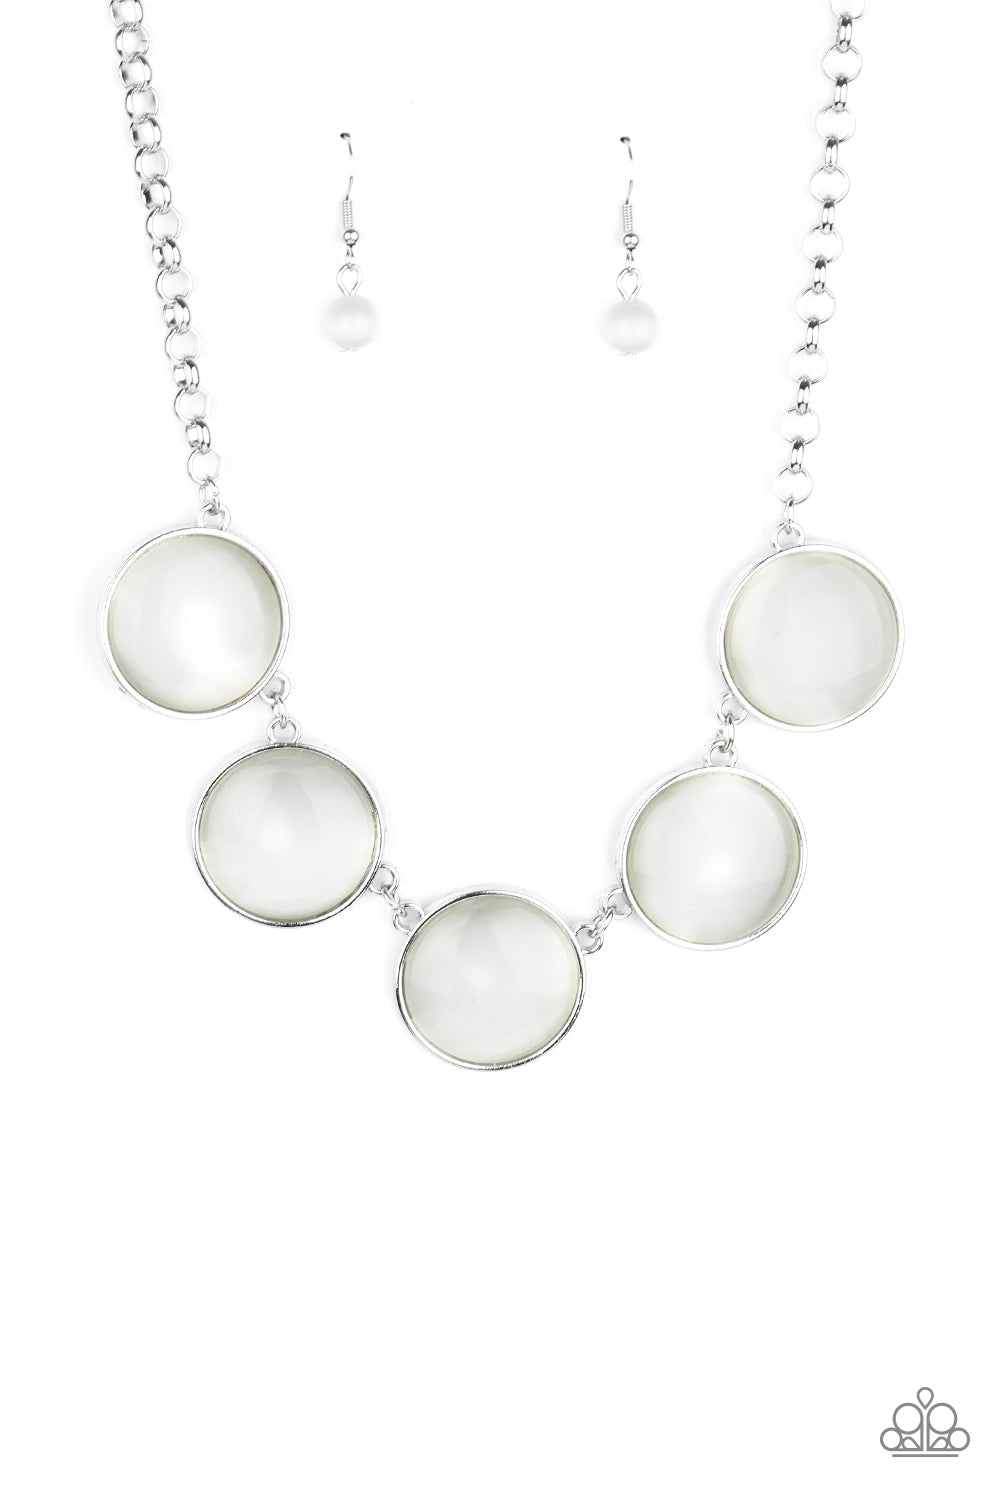 Ethereal Escape - White Necklace